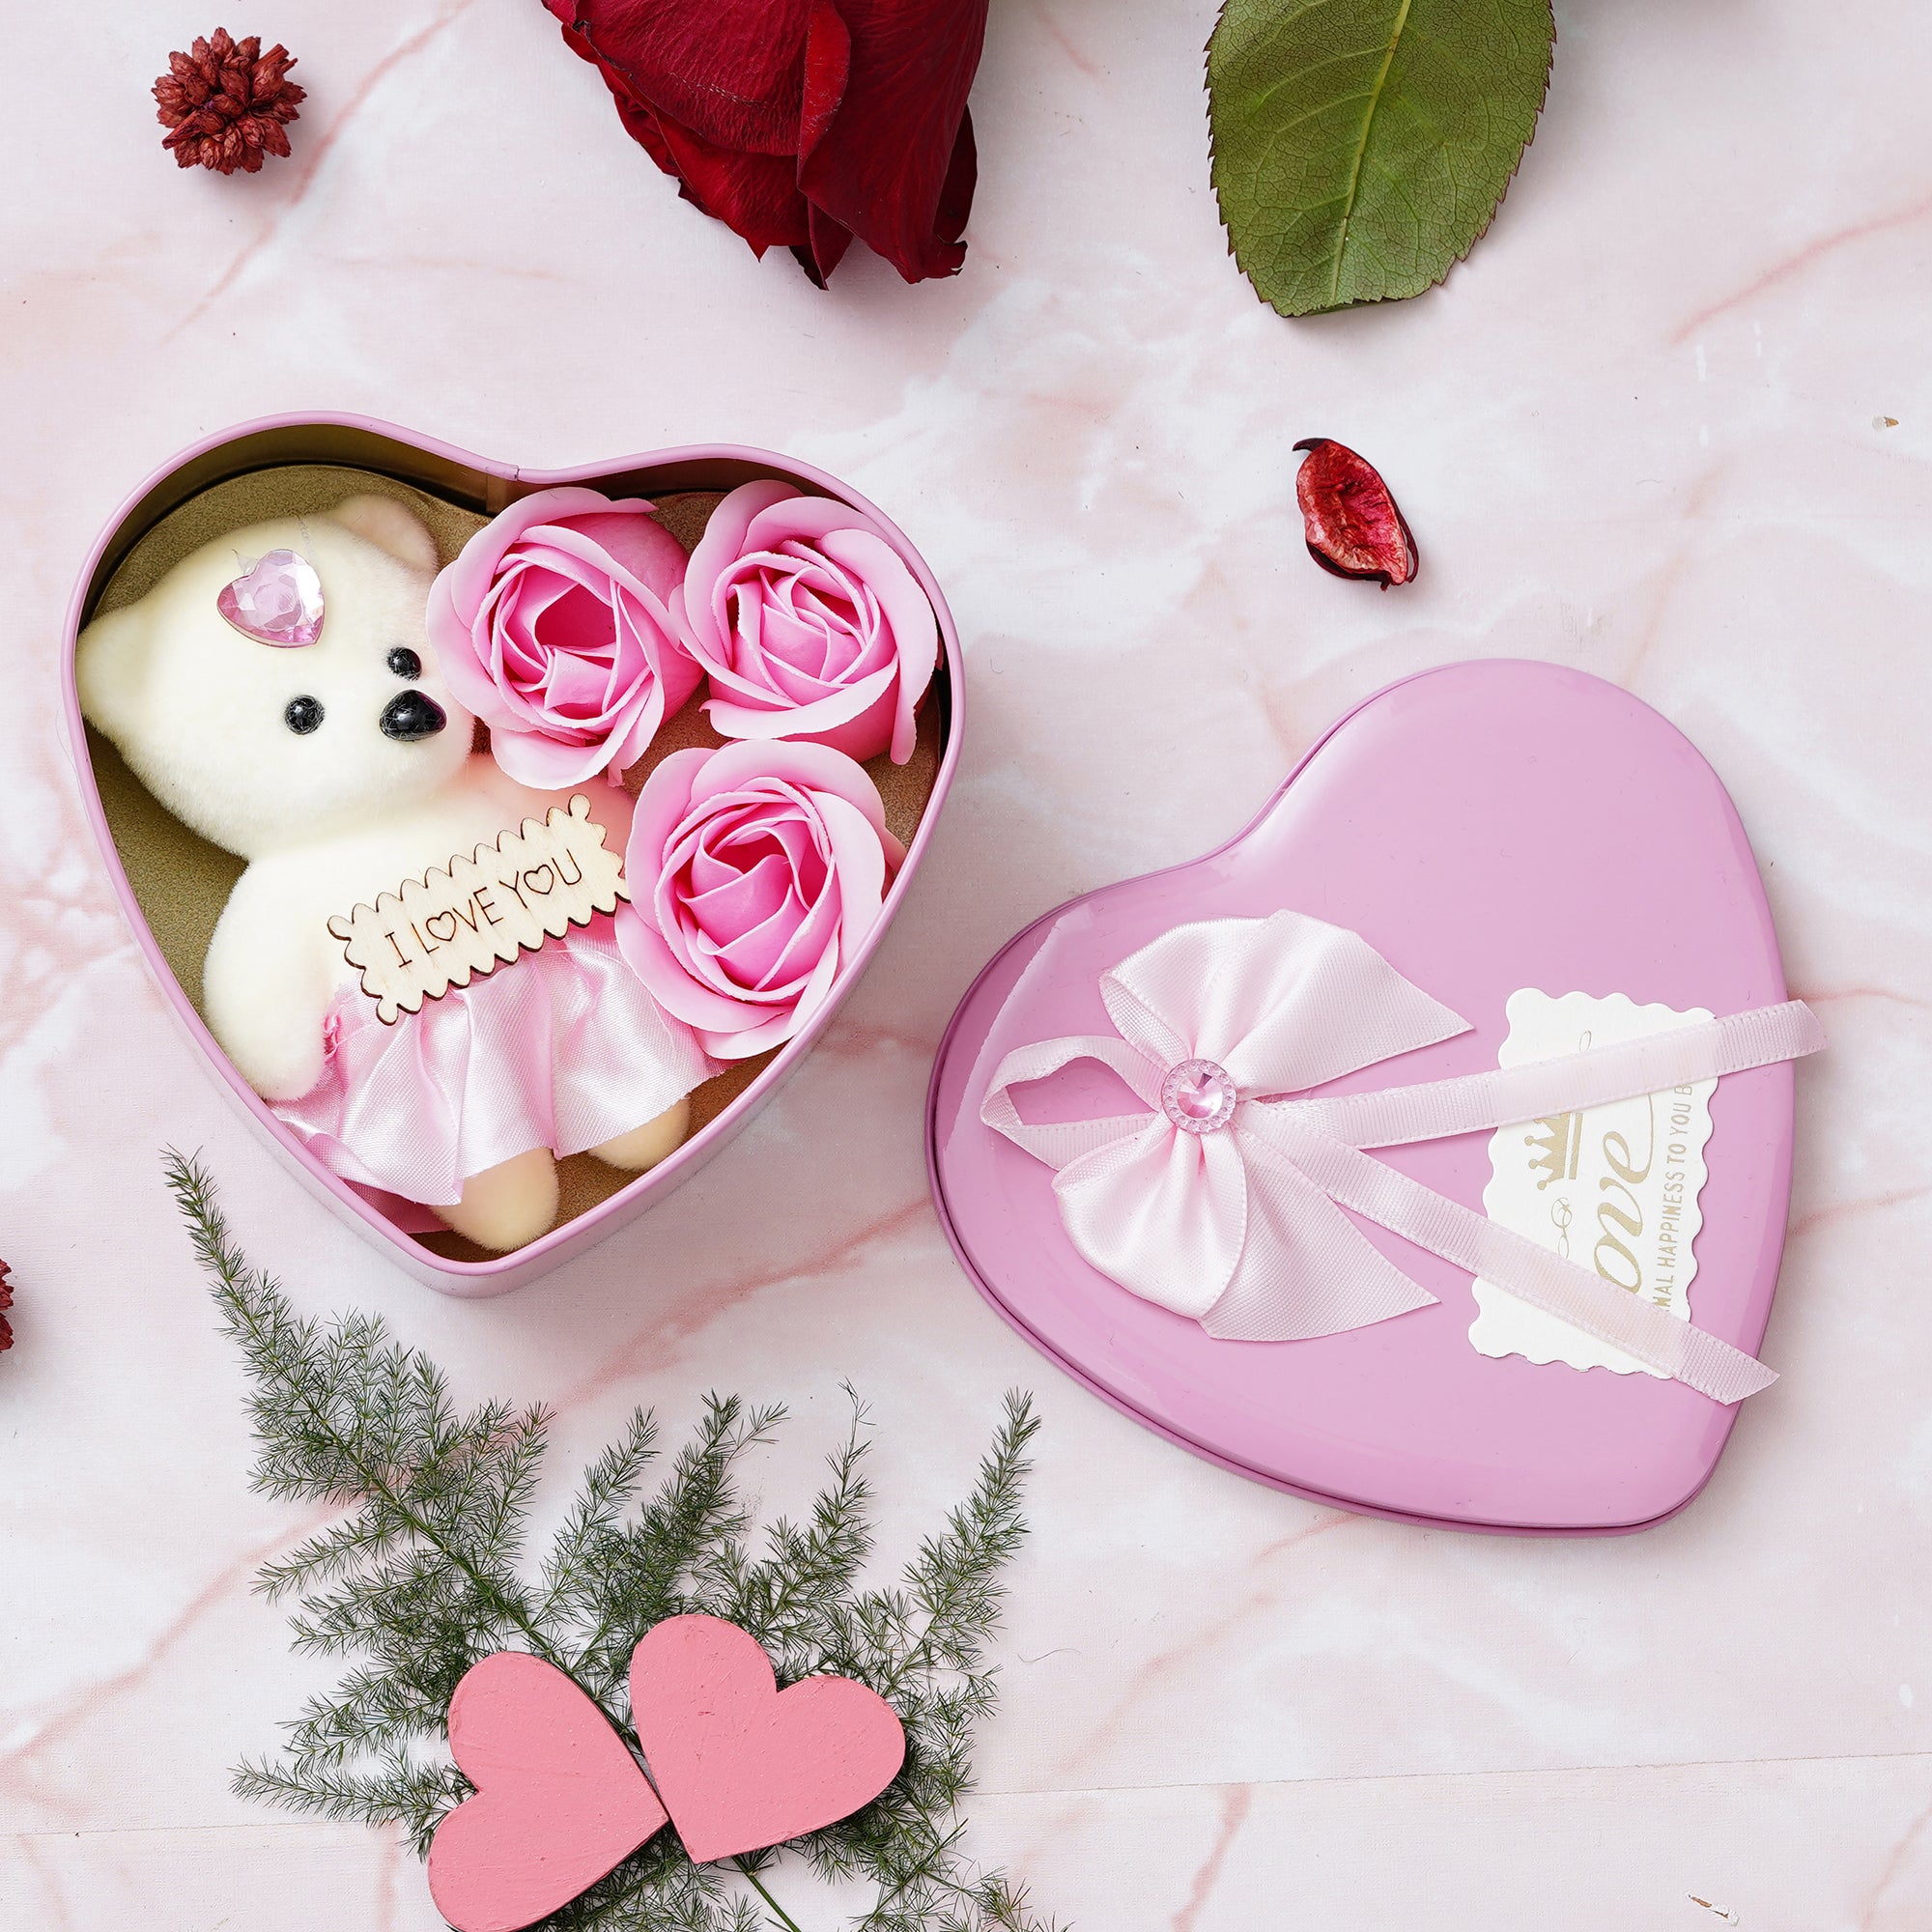 Pink Heart Shaped Gift Box With 3 Pink Roses, Teddy Bear, And A Card